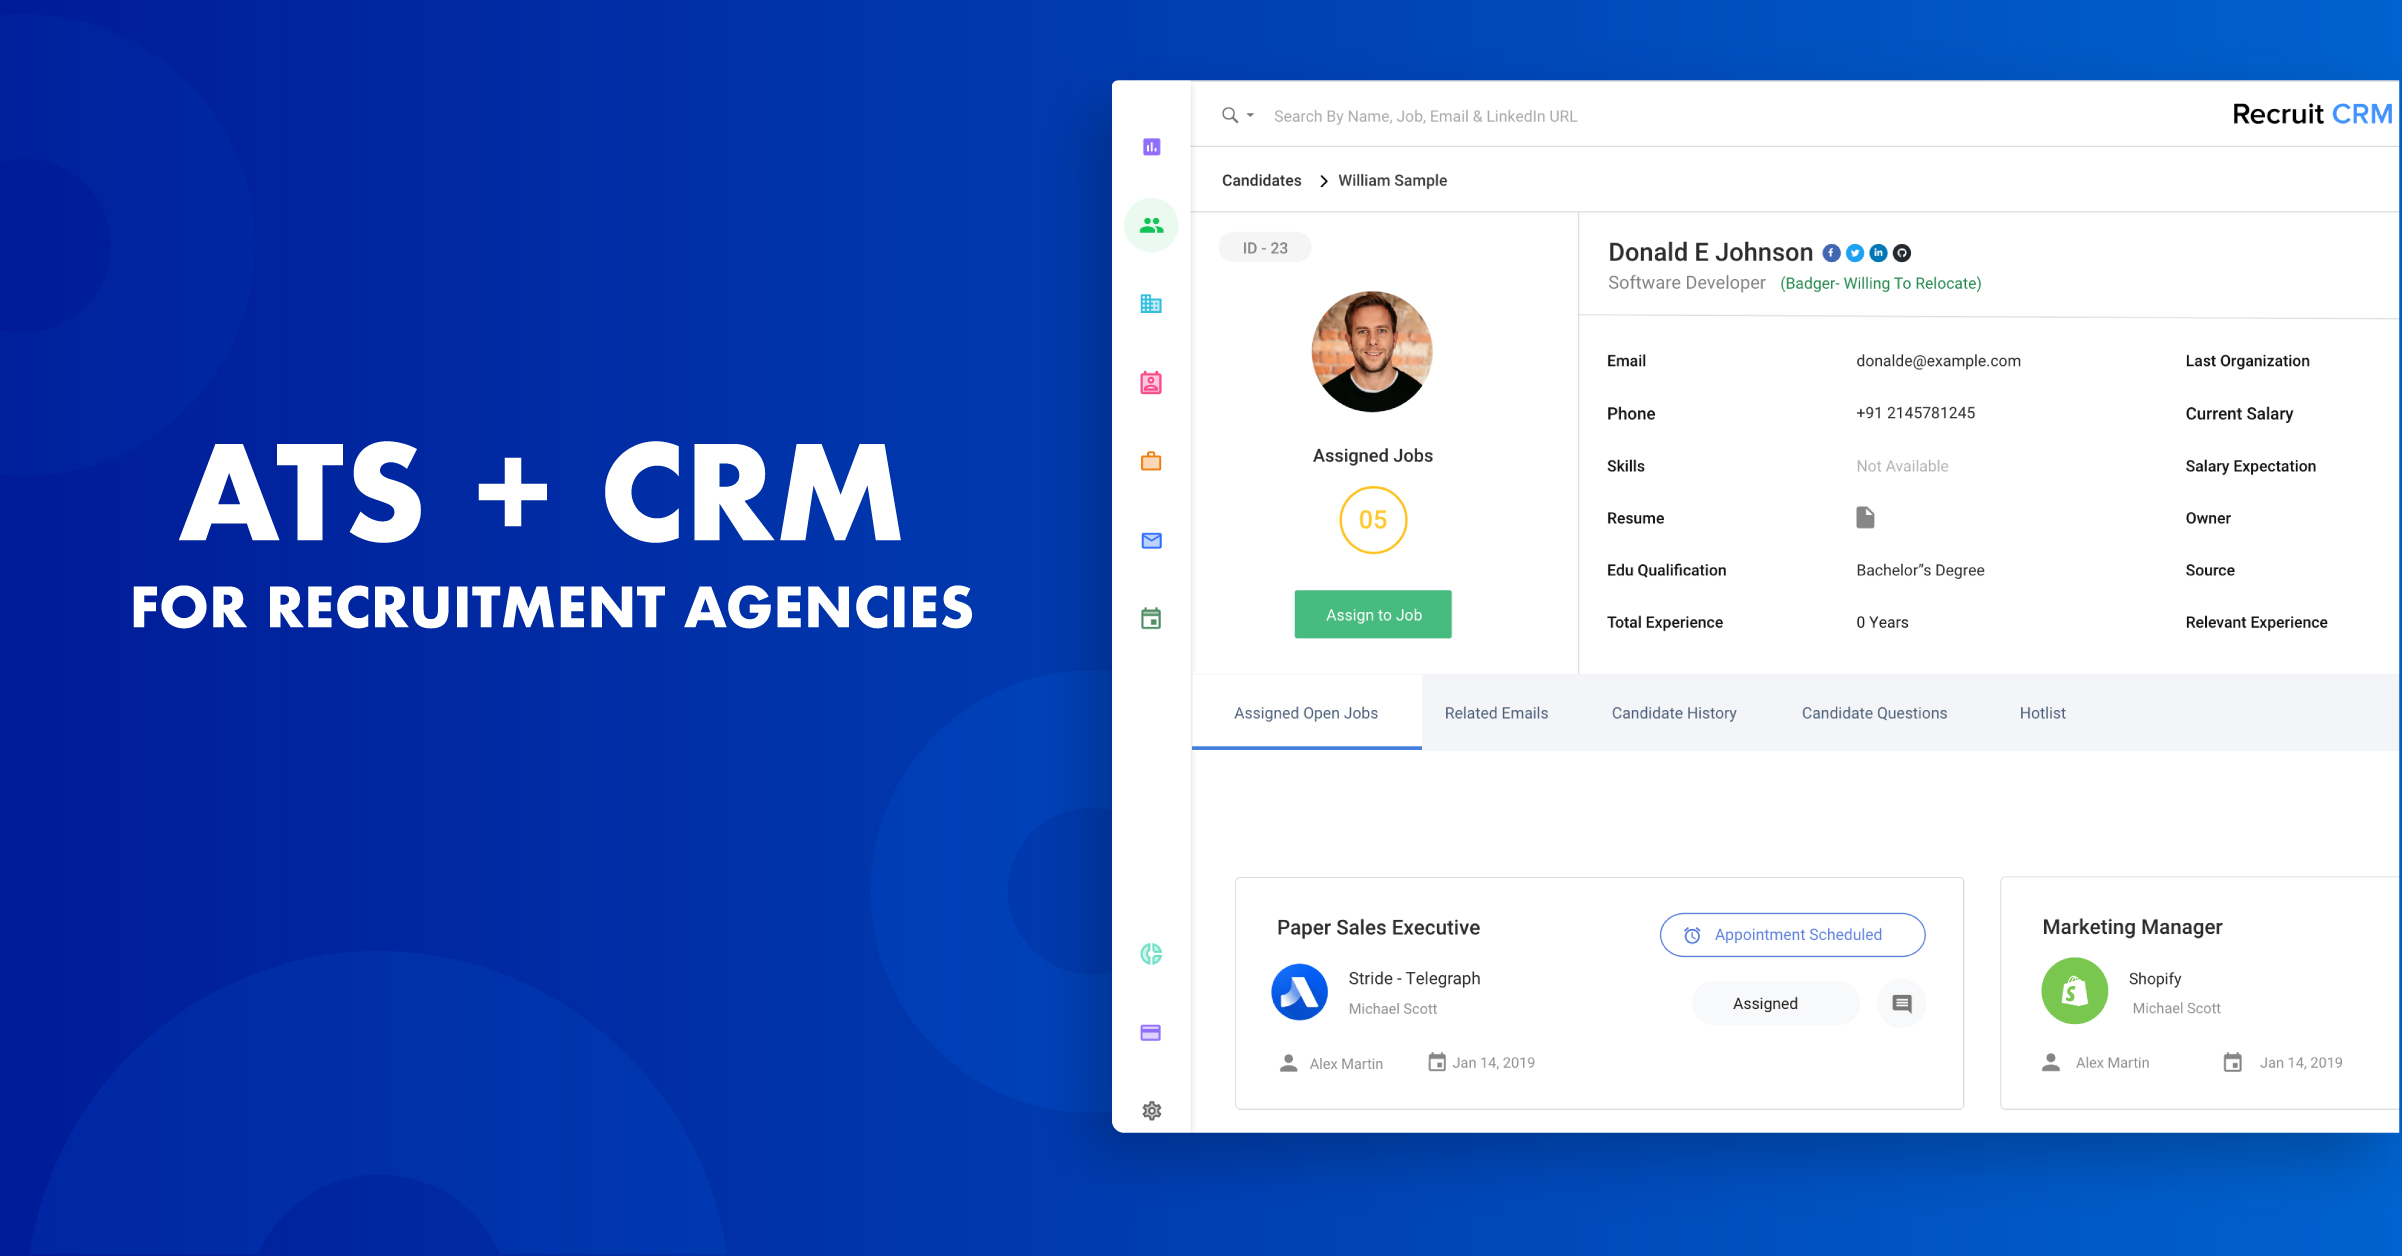 Recruit CRM Builds a Cutting Edge ATS for Recruitment Agencies Newswire